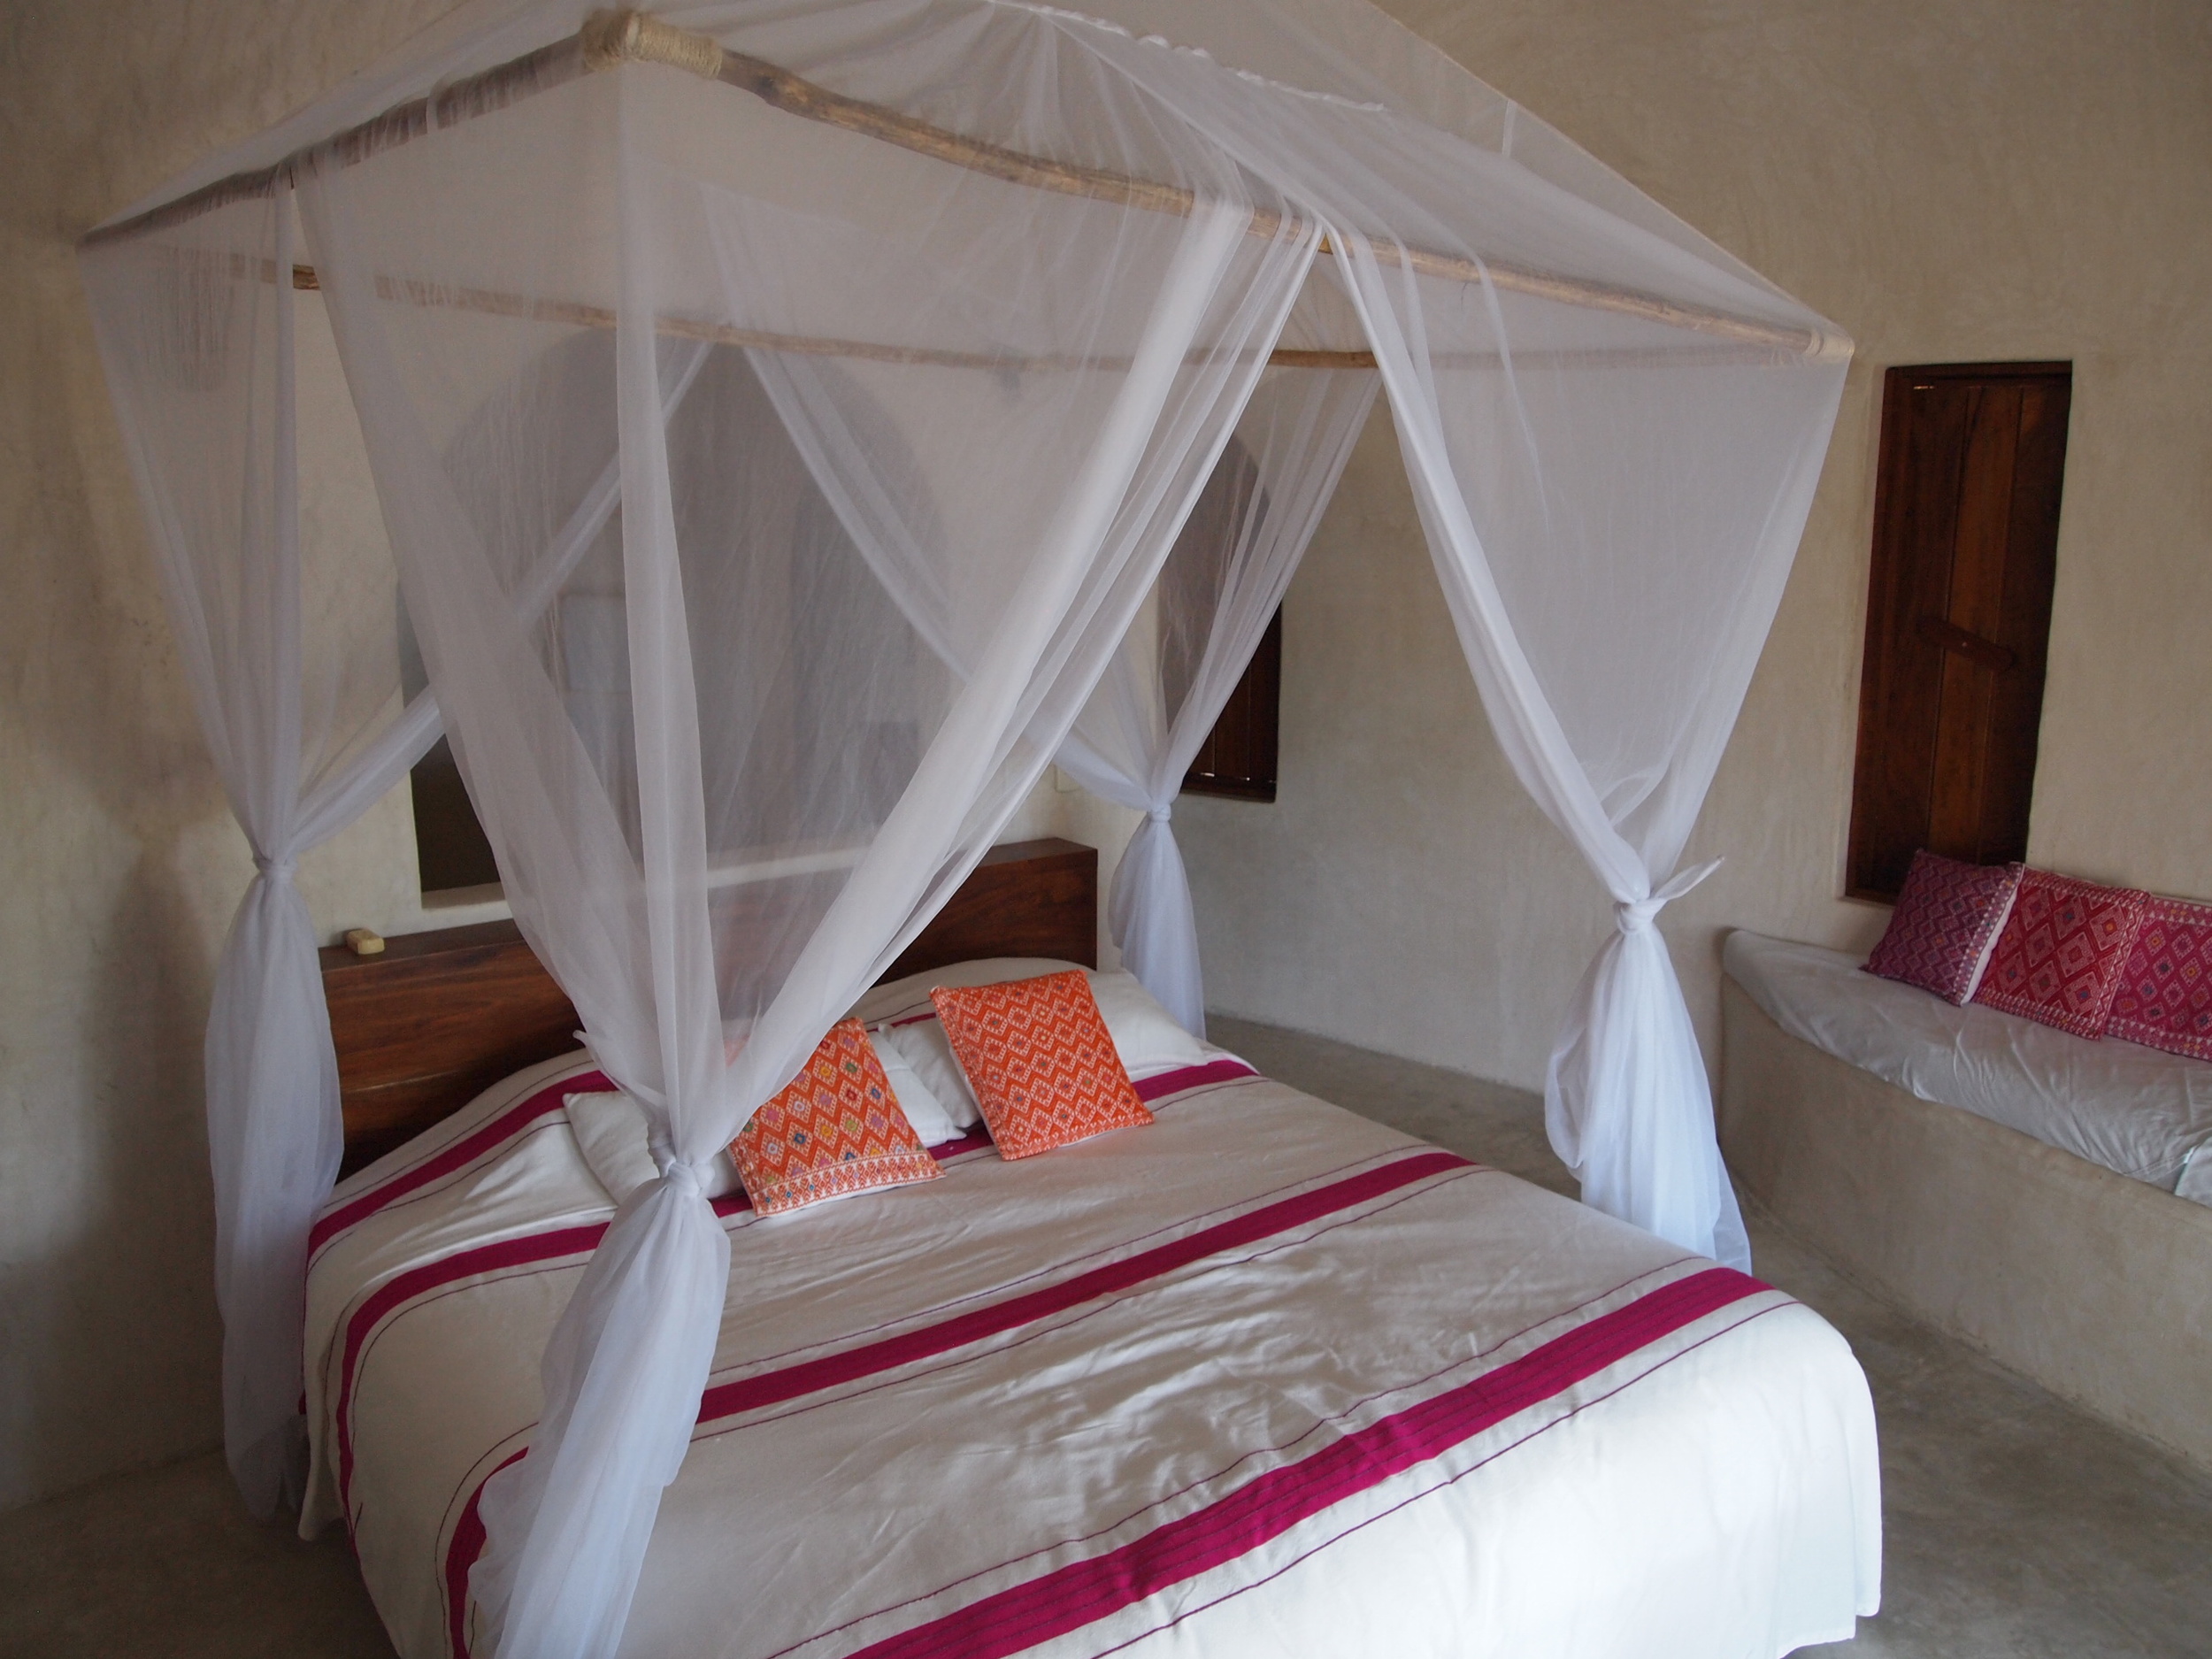  Mexico. The simple and perfect bedspreads, designed by the hotel owner at Papaya Playa Project.&nbsp; 